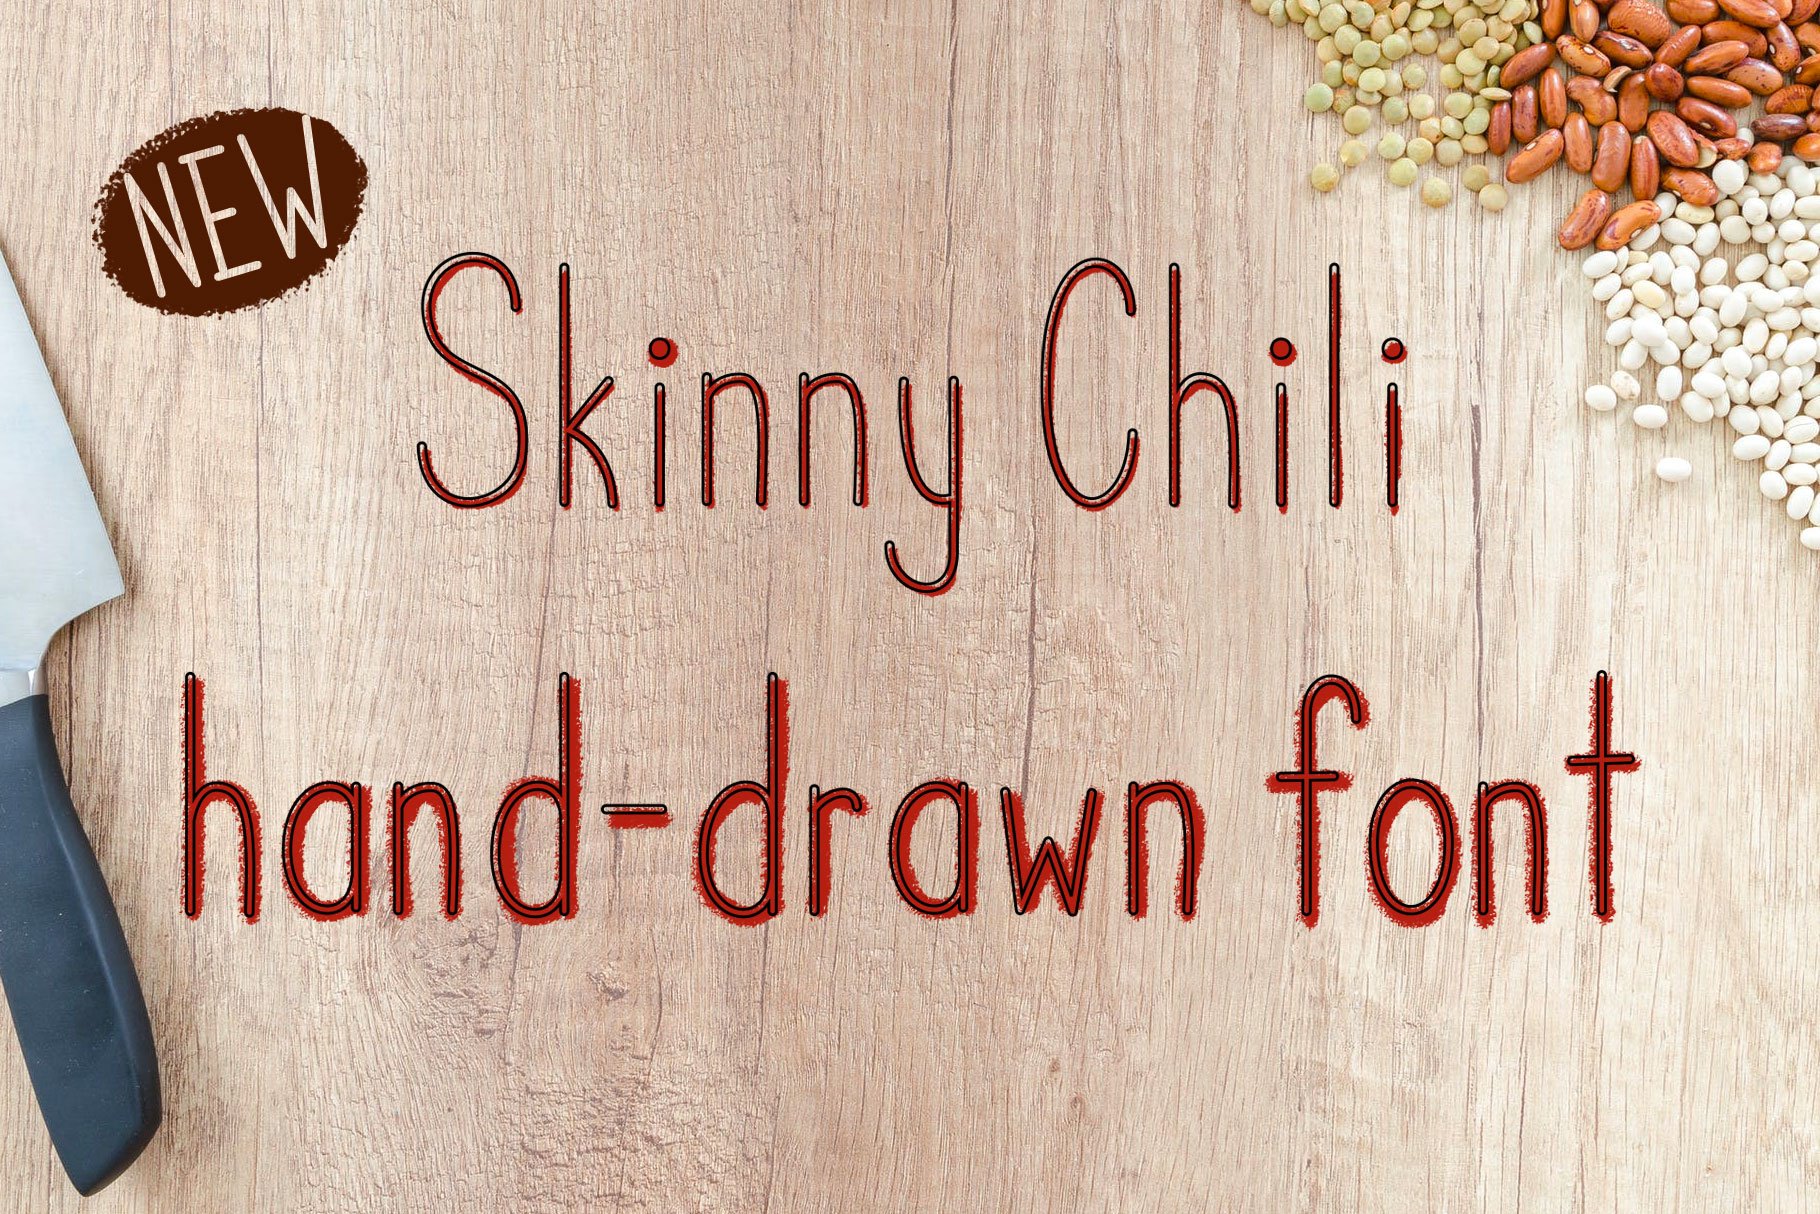 Skinny Chili font cover image.